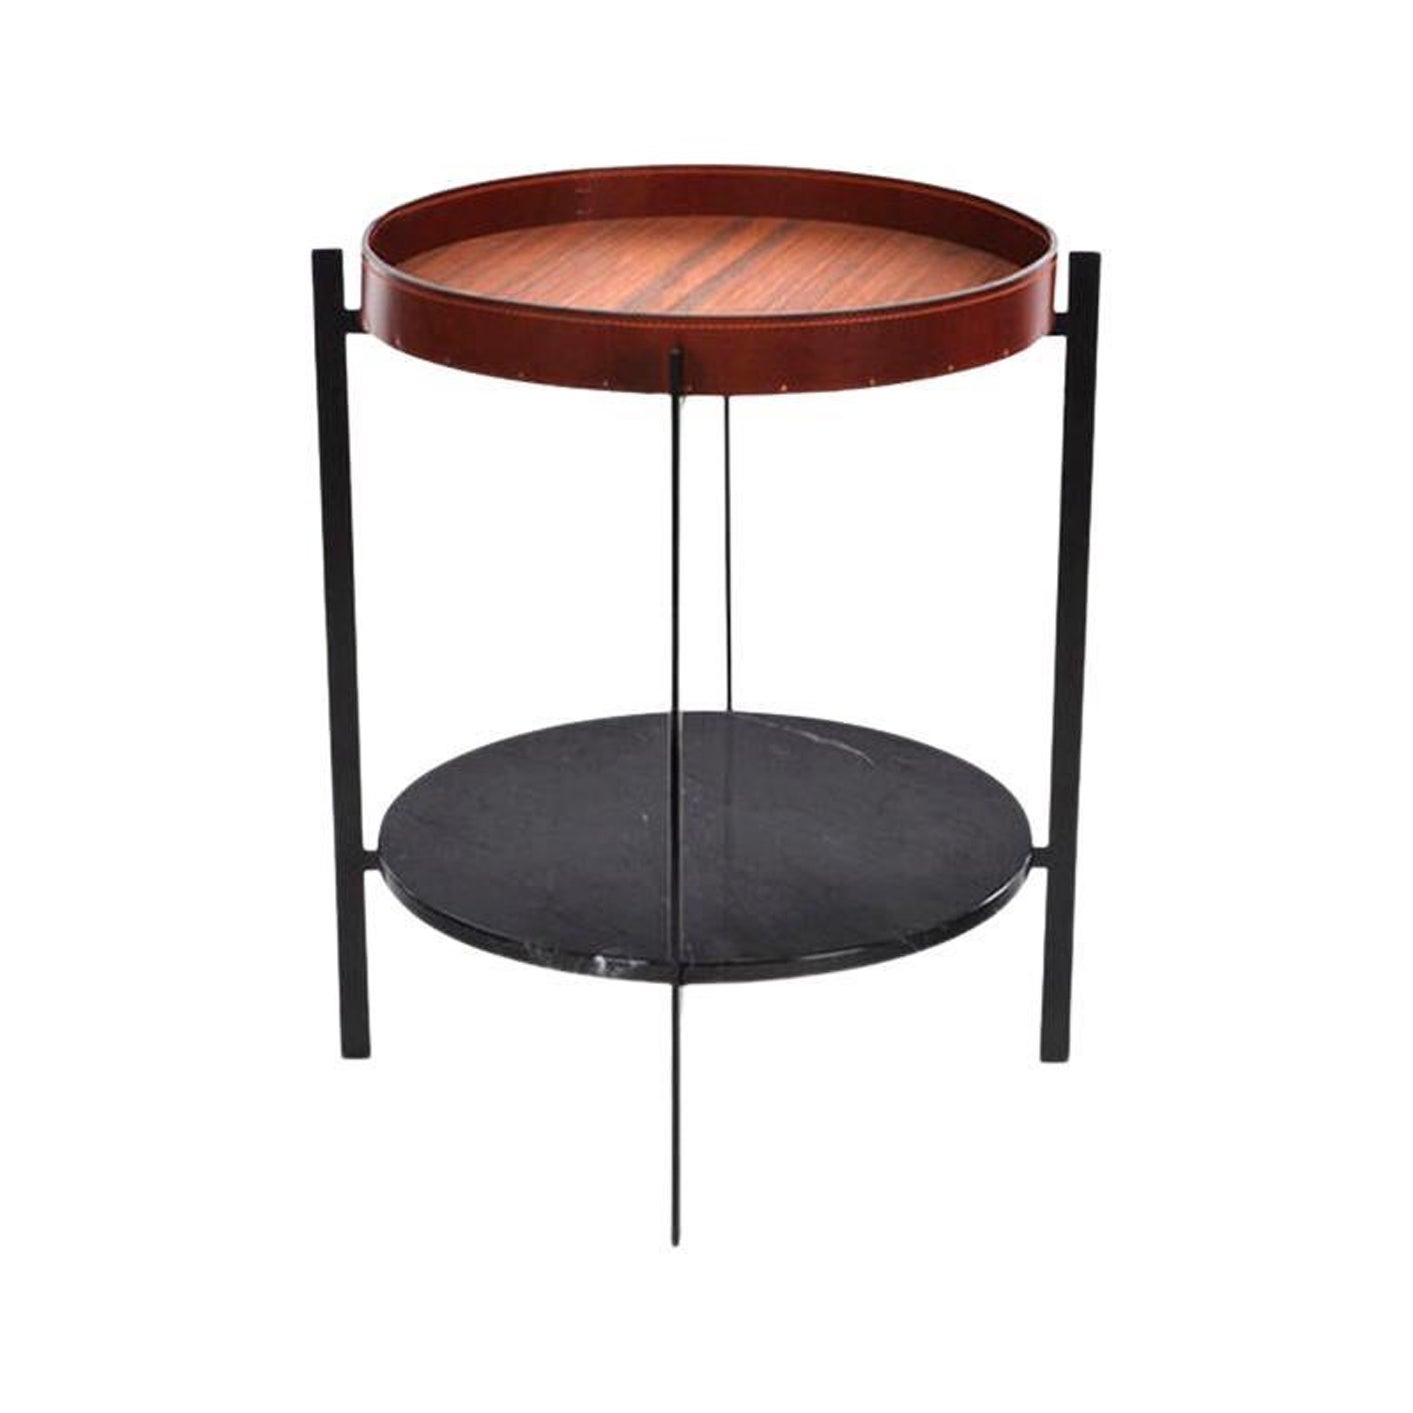 Cognac Leather, Teak Wood and Black Marquina Marble Deck Table by OxDenmarq